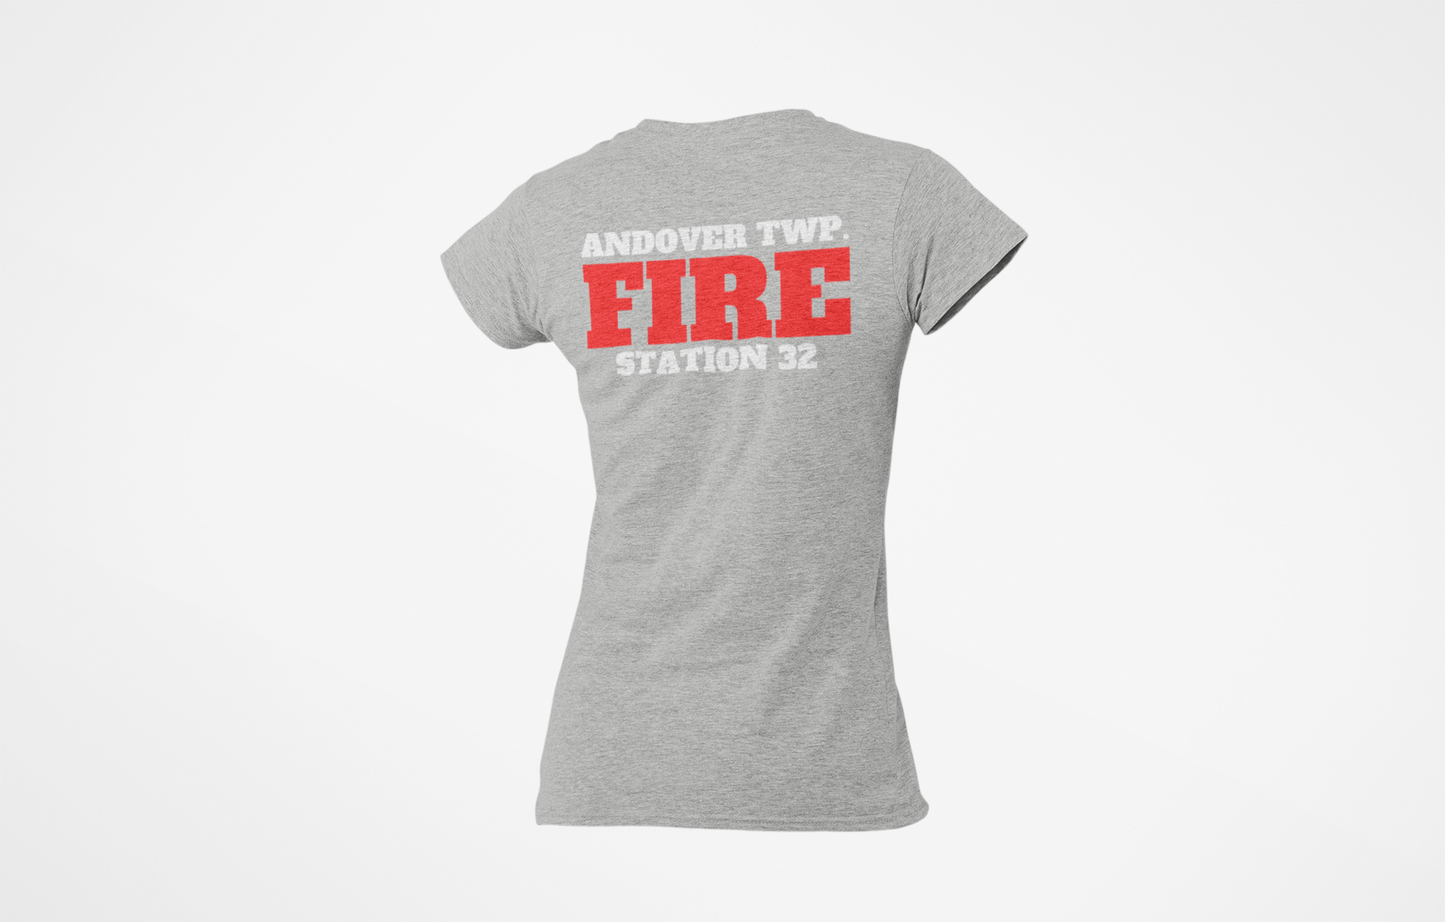 Andover Township Fire T-Shirt